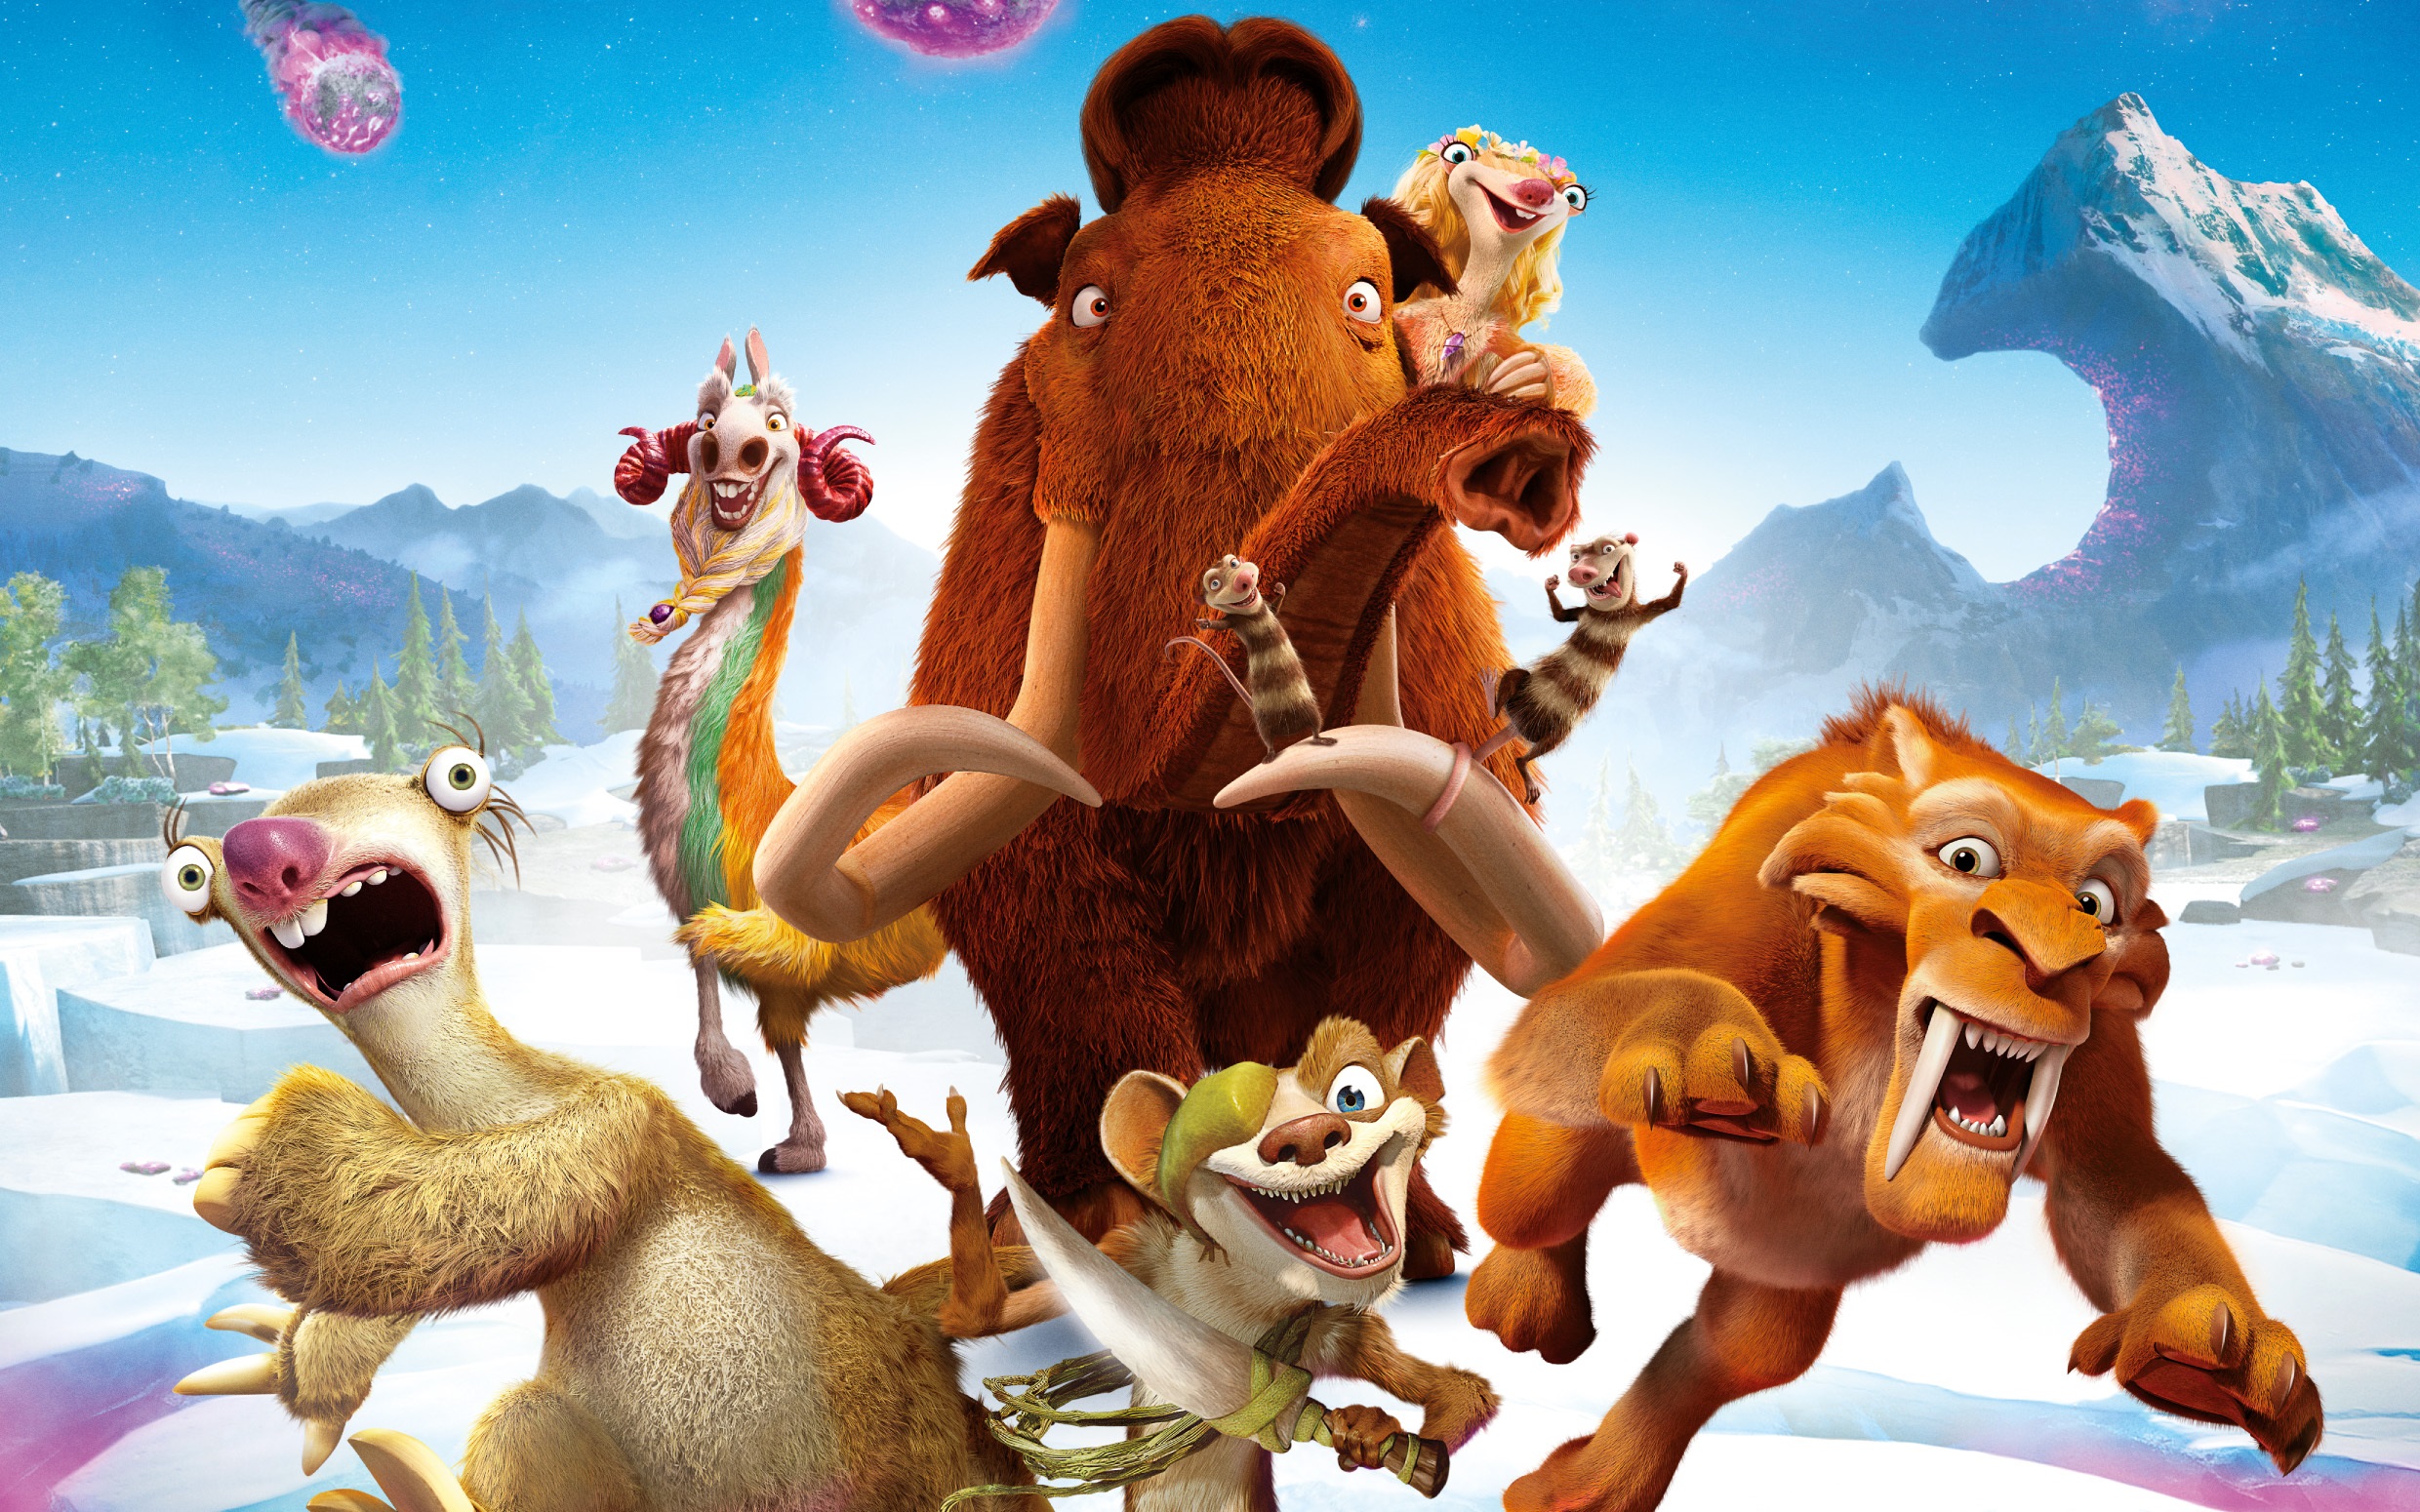 http://hdqwalls.com/wallpapers/ice-age-collision-course-animated-movie-sd.jpg